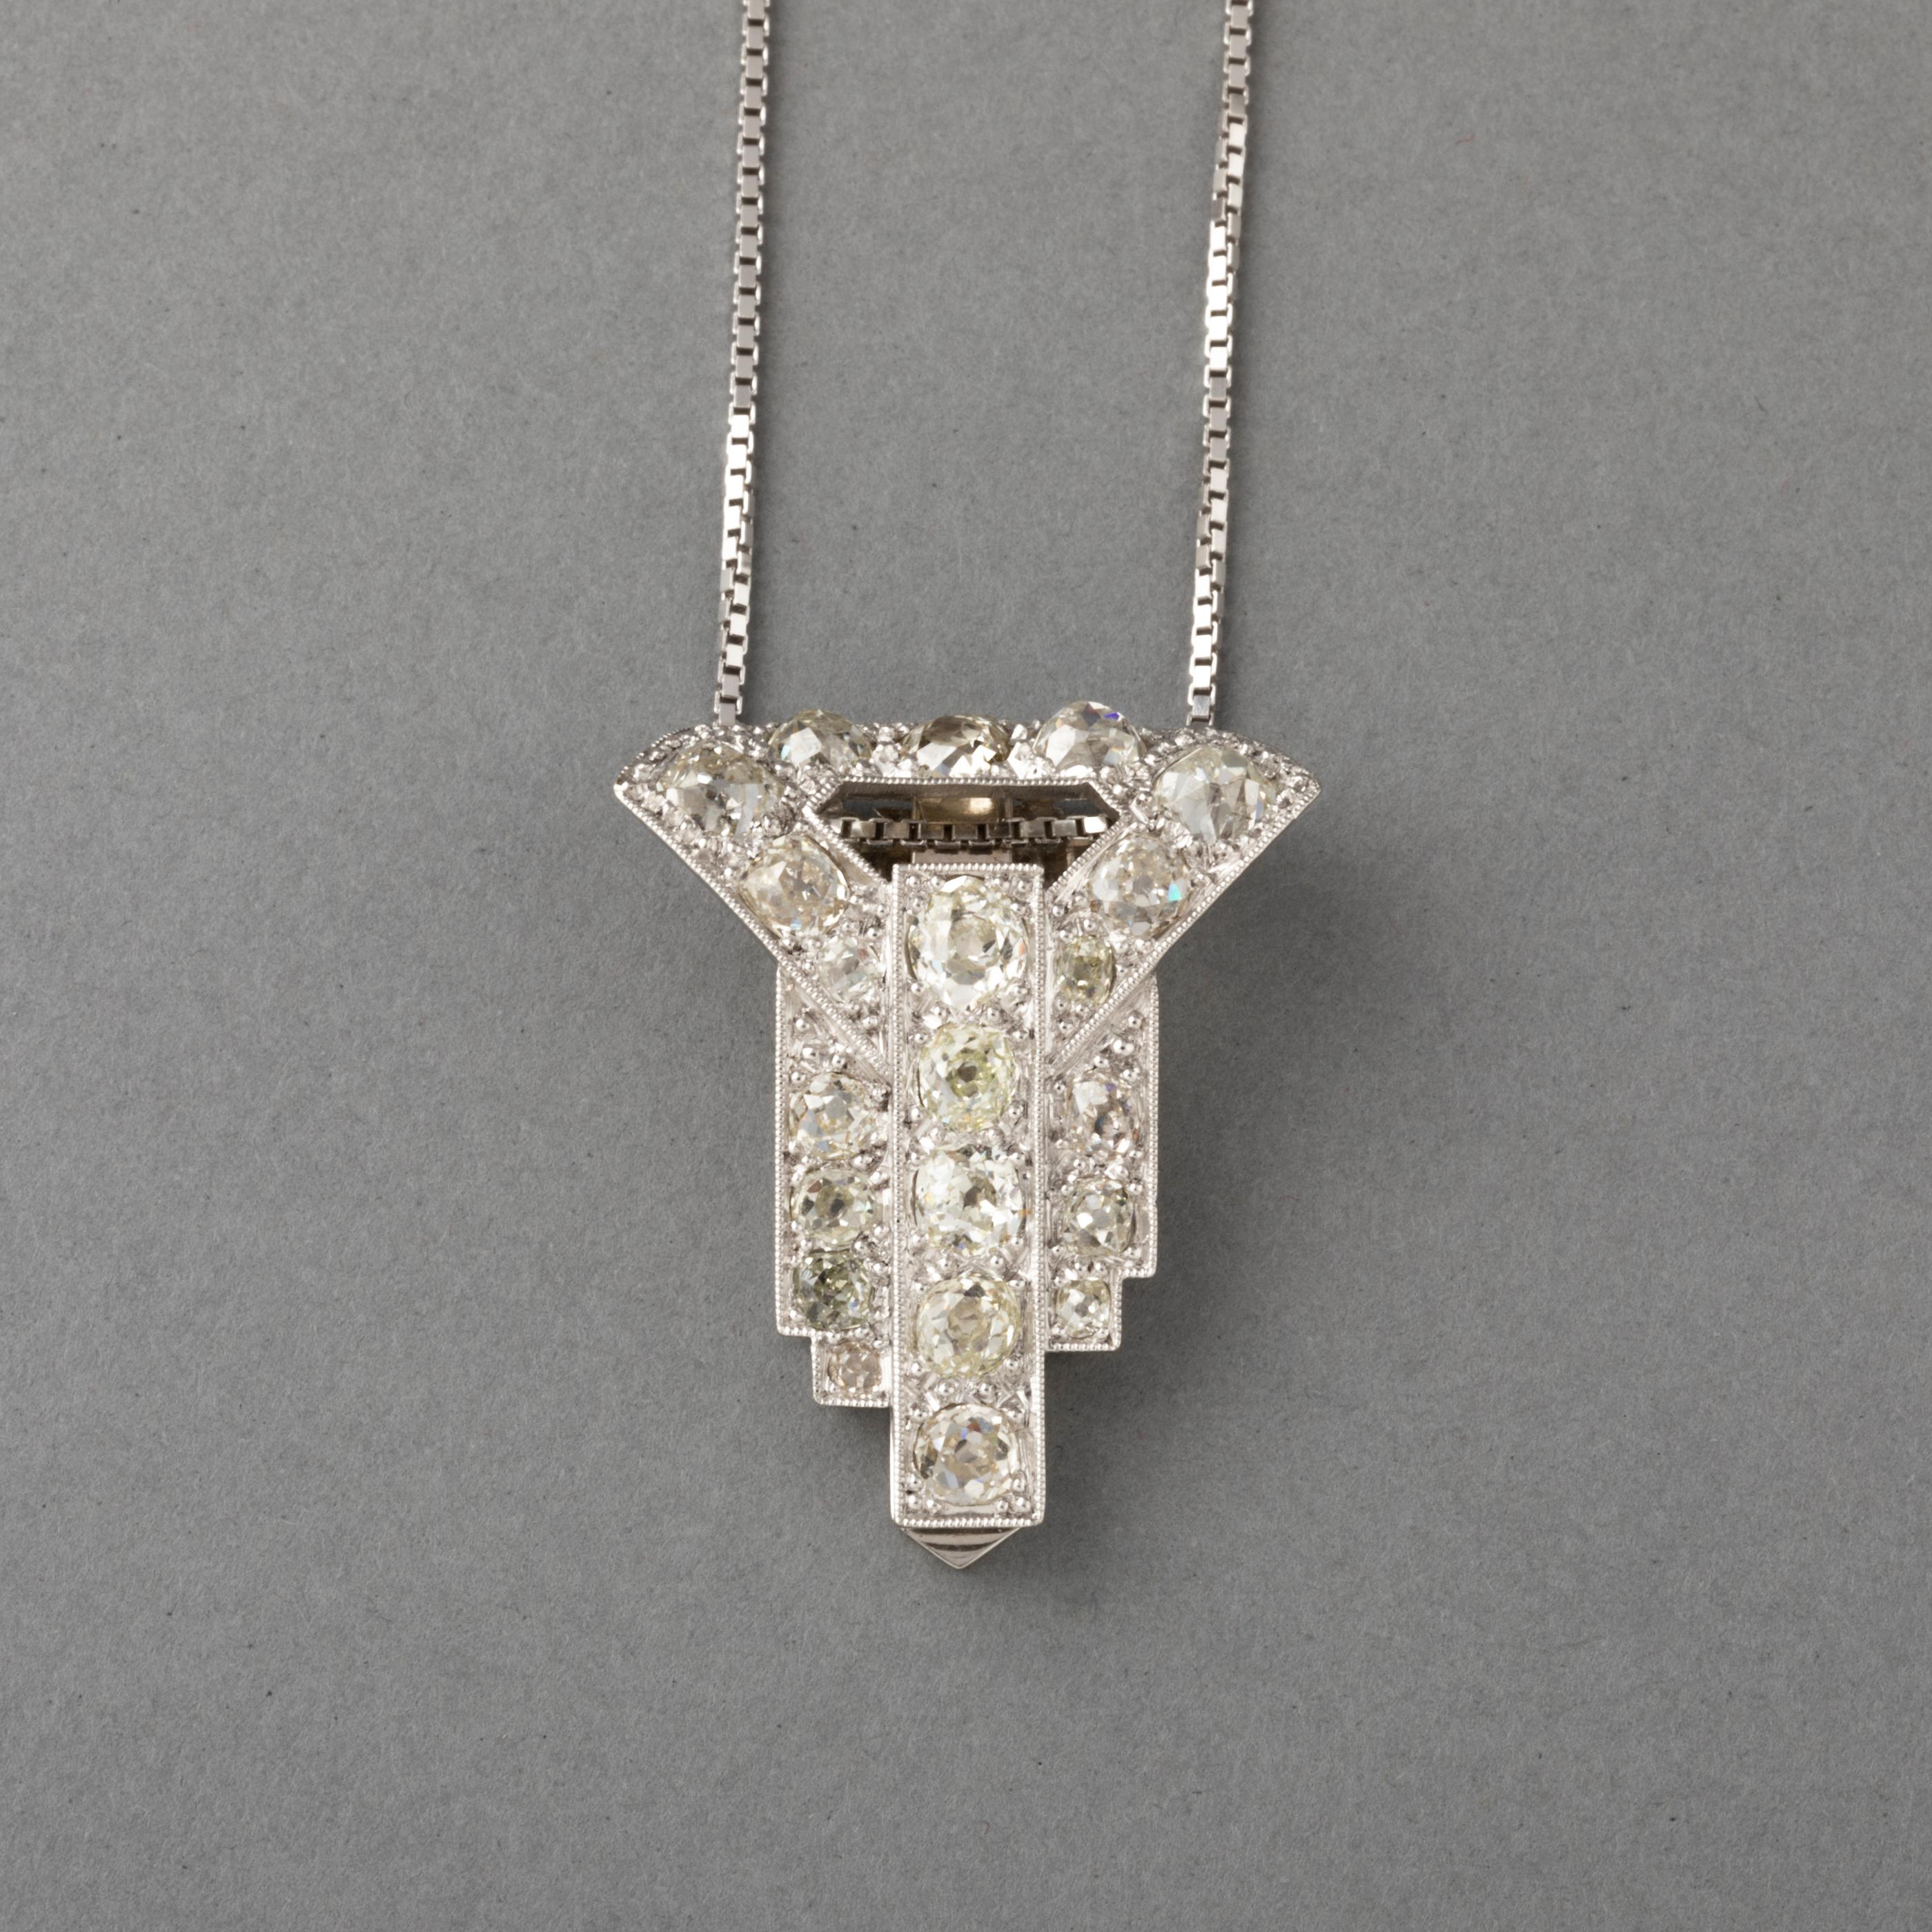 Platinum and 2.40 Carats Diamonds French Art Deco Clip.

Very beautiful clip, made in France circa 1930. The design is elegant.
Made In Platinum and diamonds. The cut is old european cut.
The diamonds are good quality, they are clear. 2.40 Carats